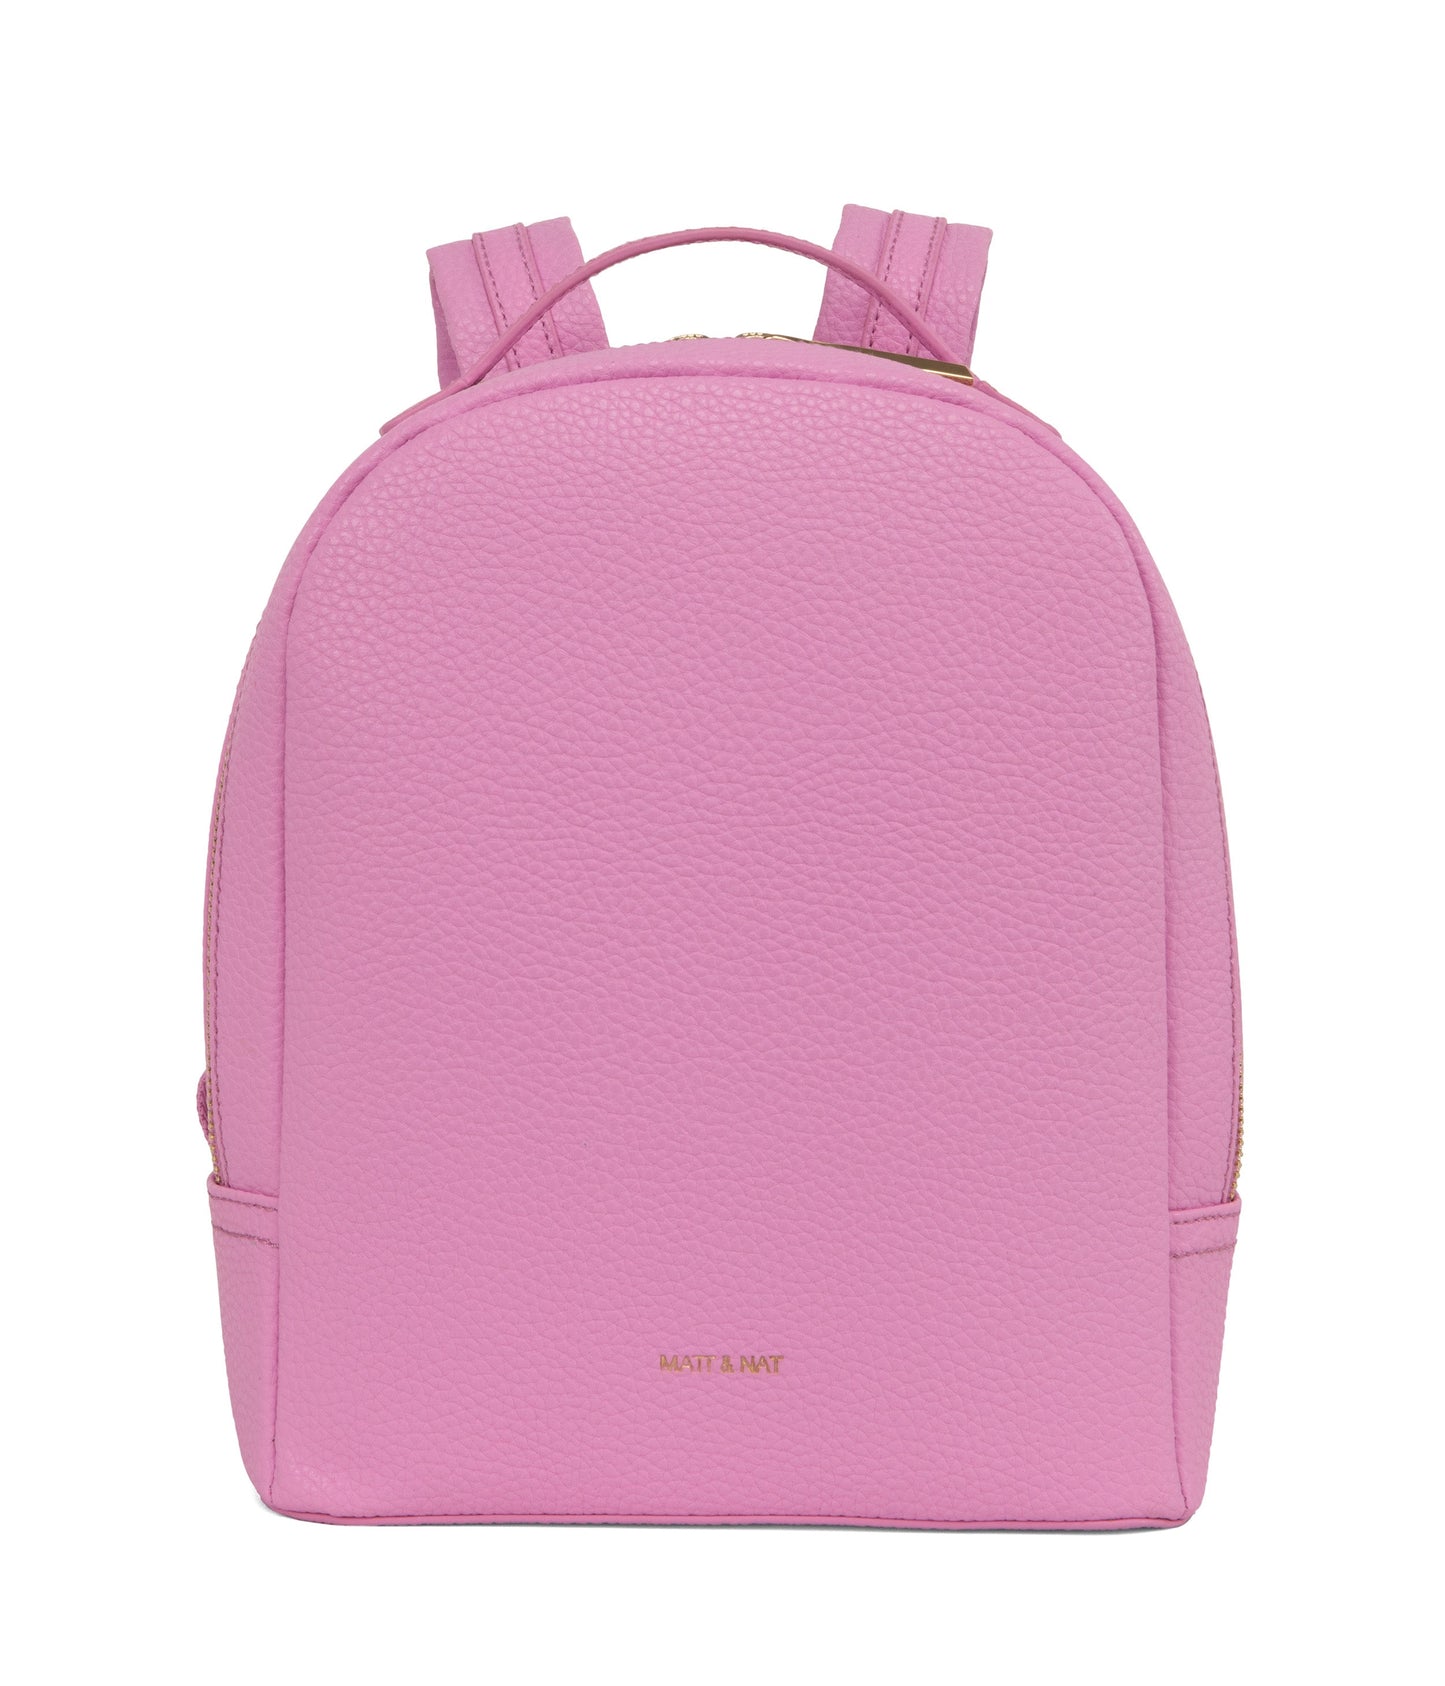 OLLY Vegan Backpack - Purity | Color: Pink - variant::flora